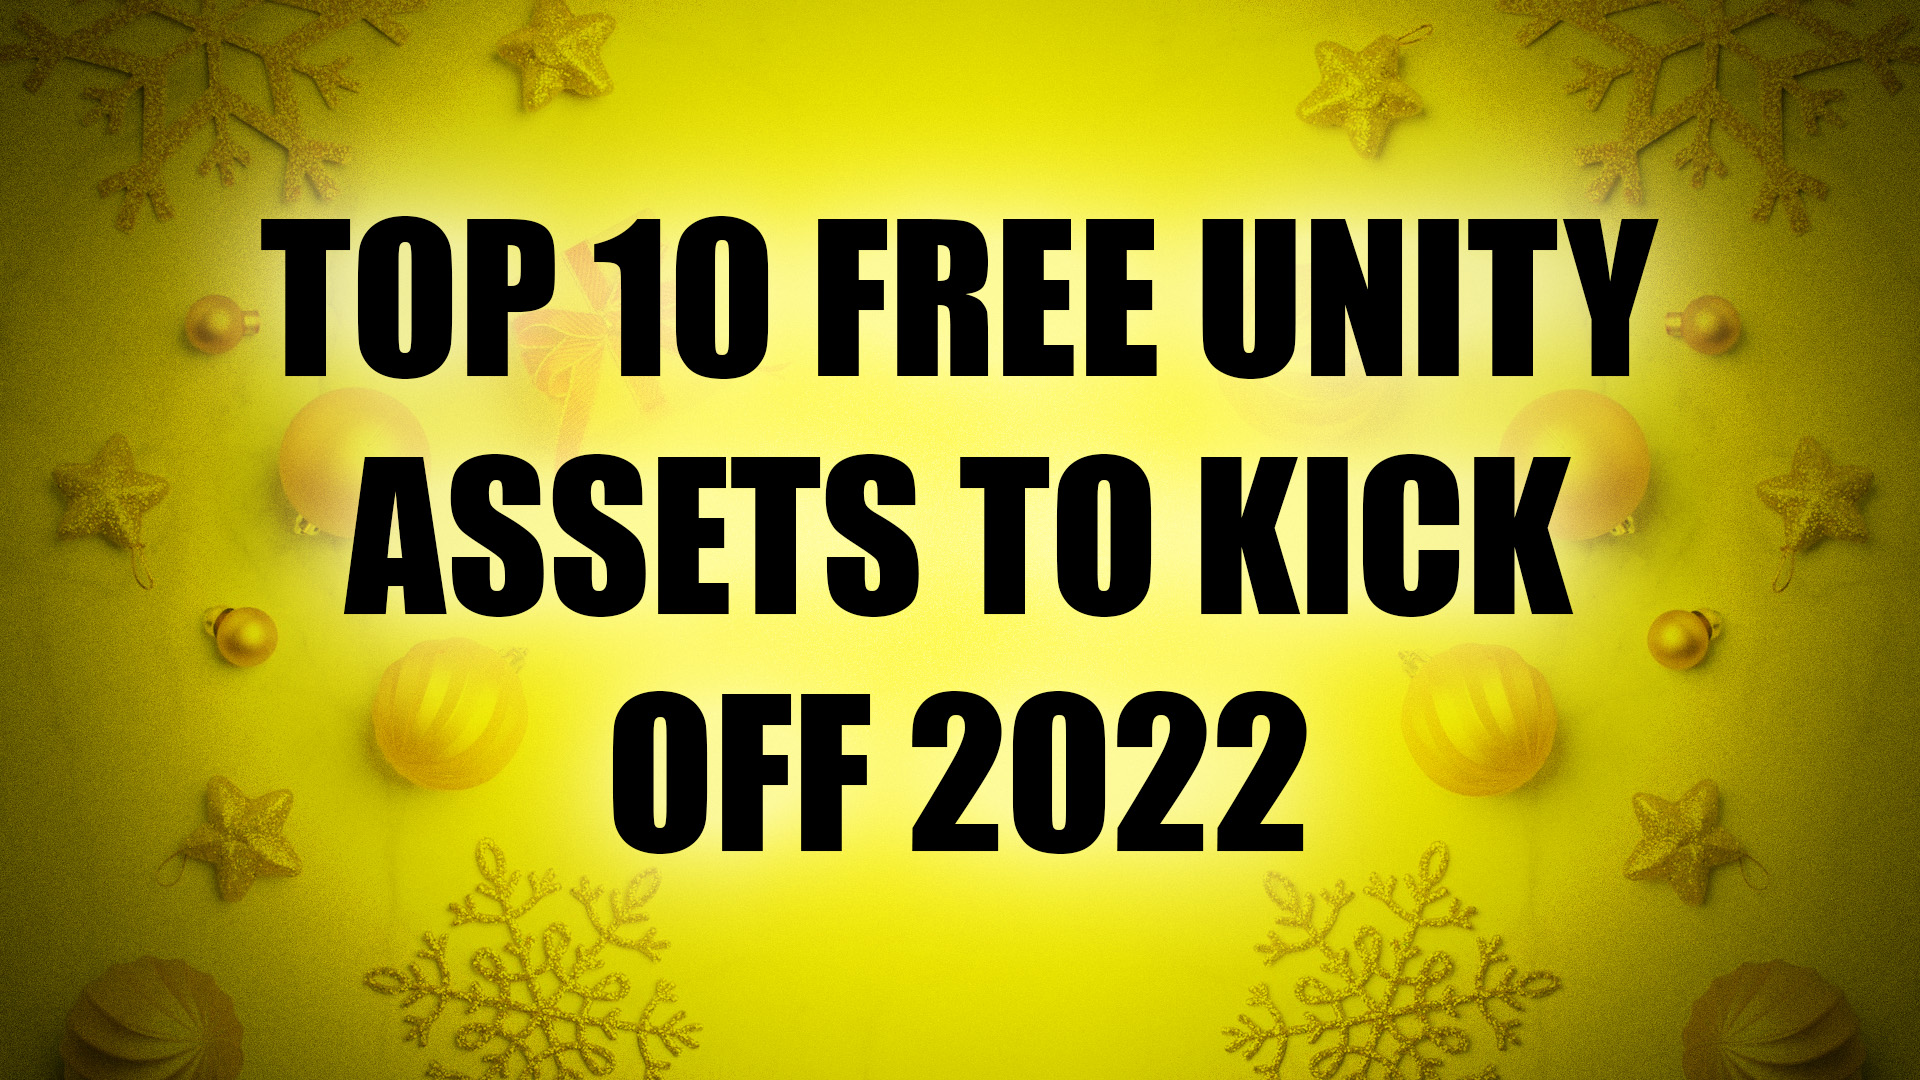 Top 10 Free Unity Assets to Kick off 2022